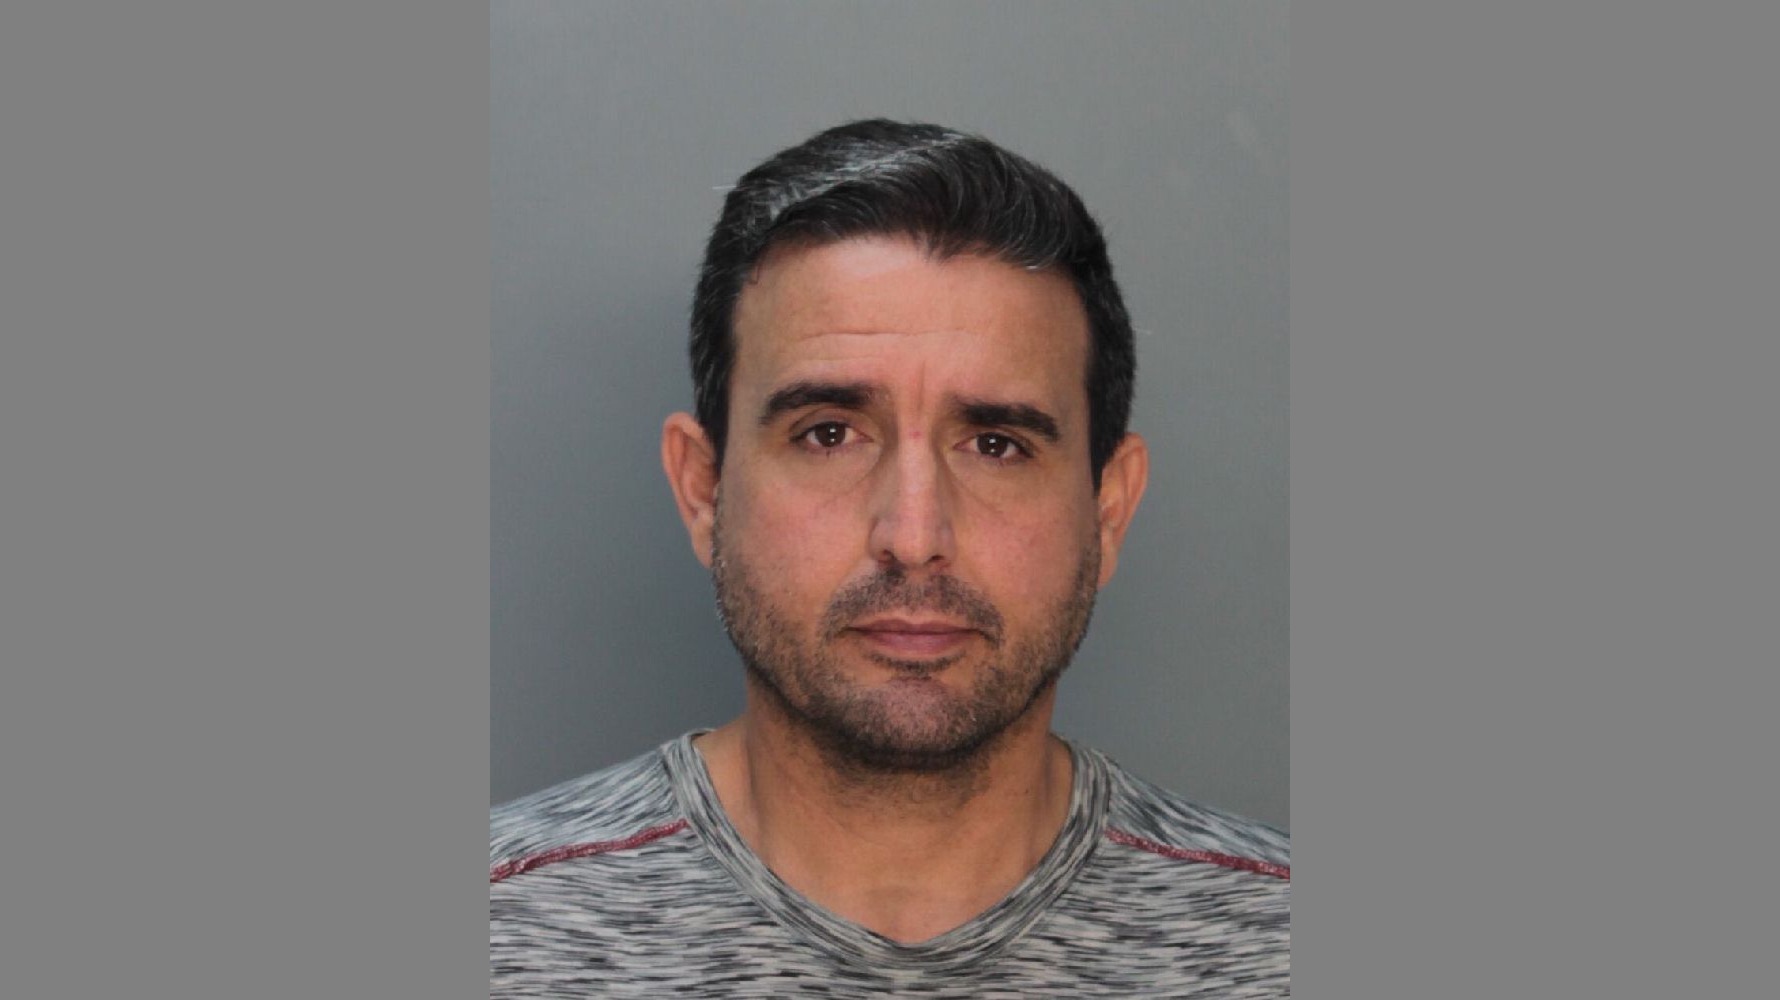 Former Aide to Miami Mayor Faces Federal Child Porn Charges